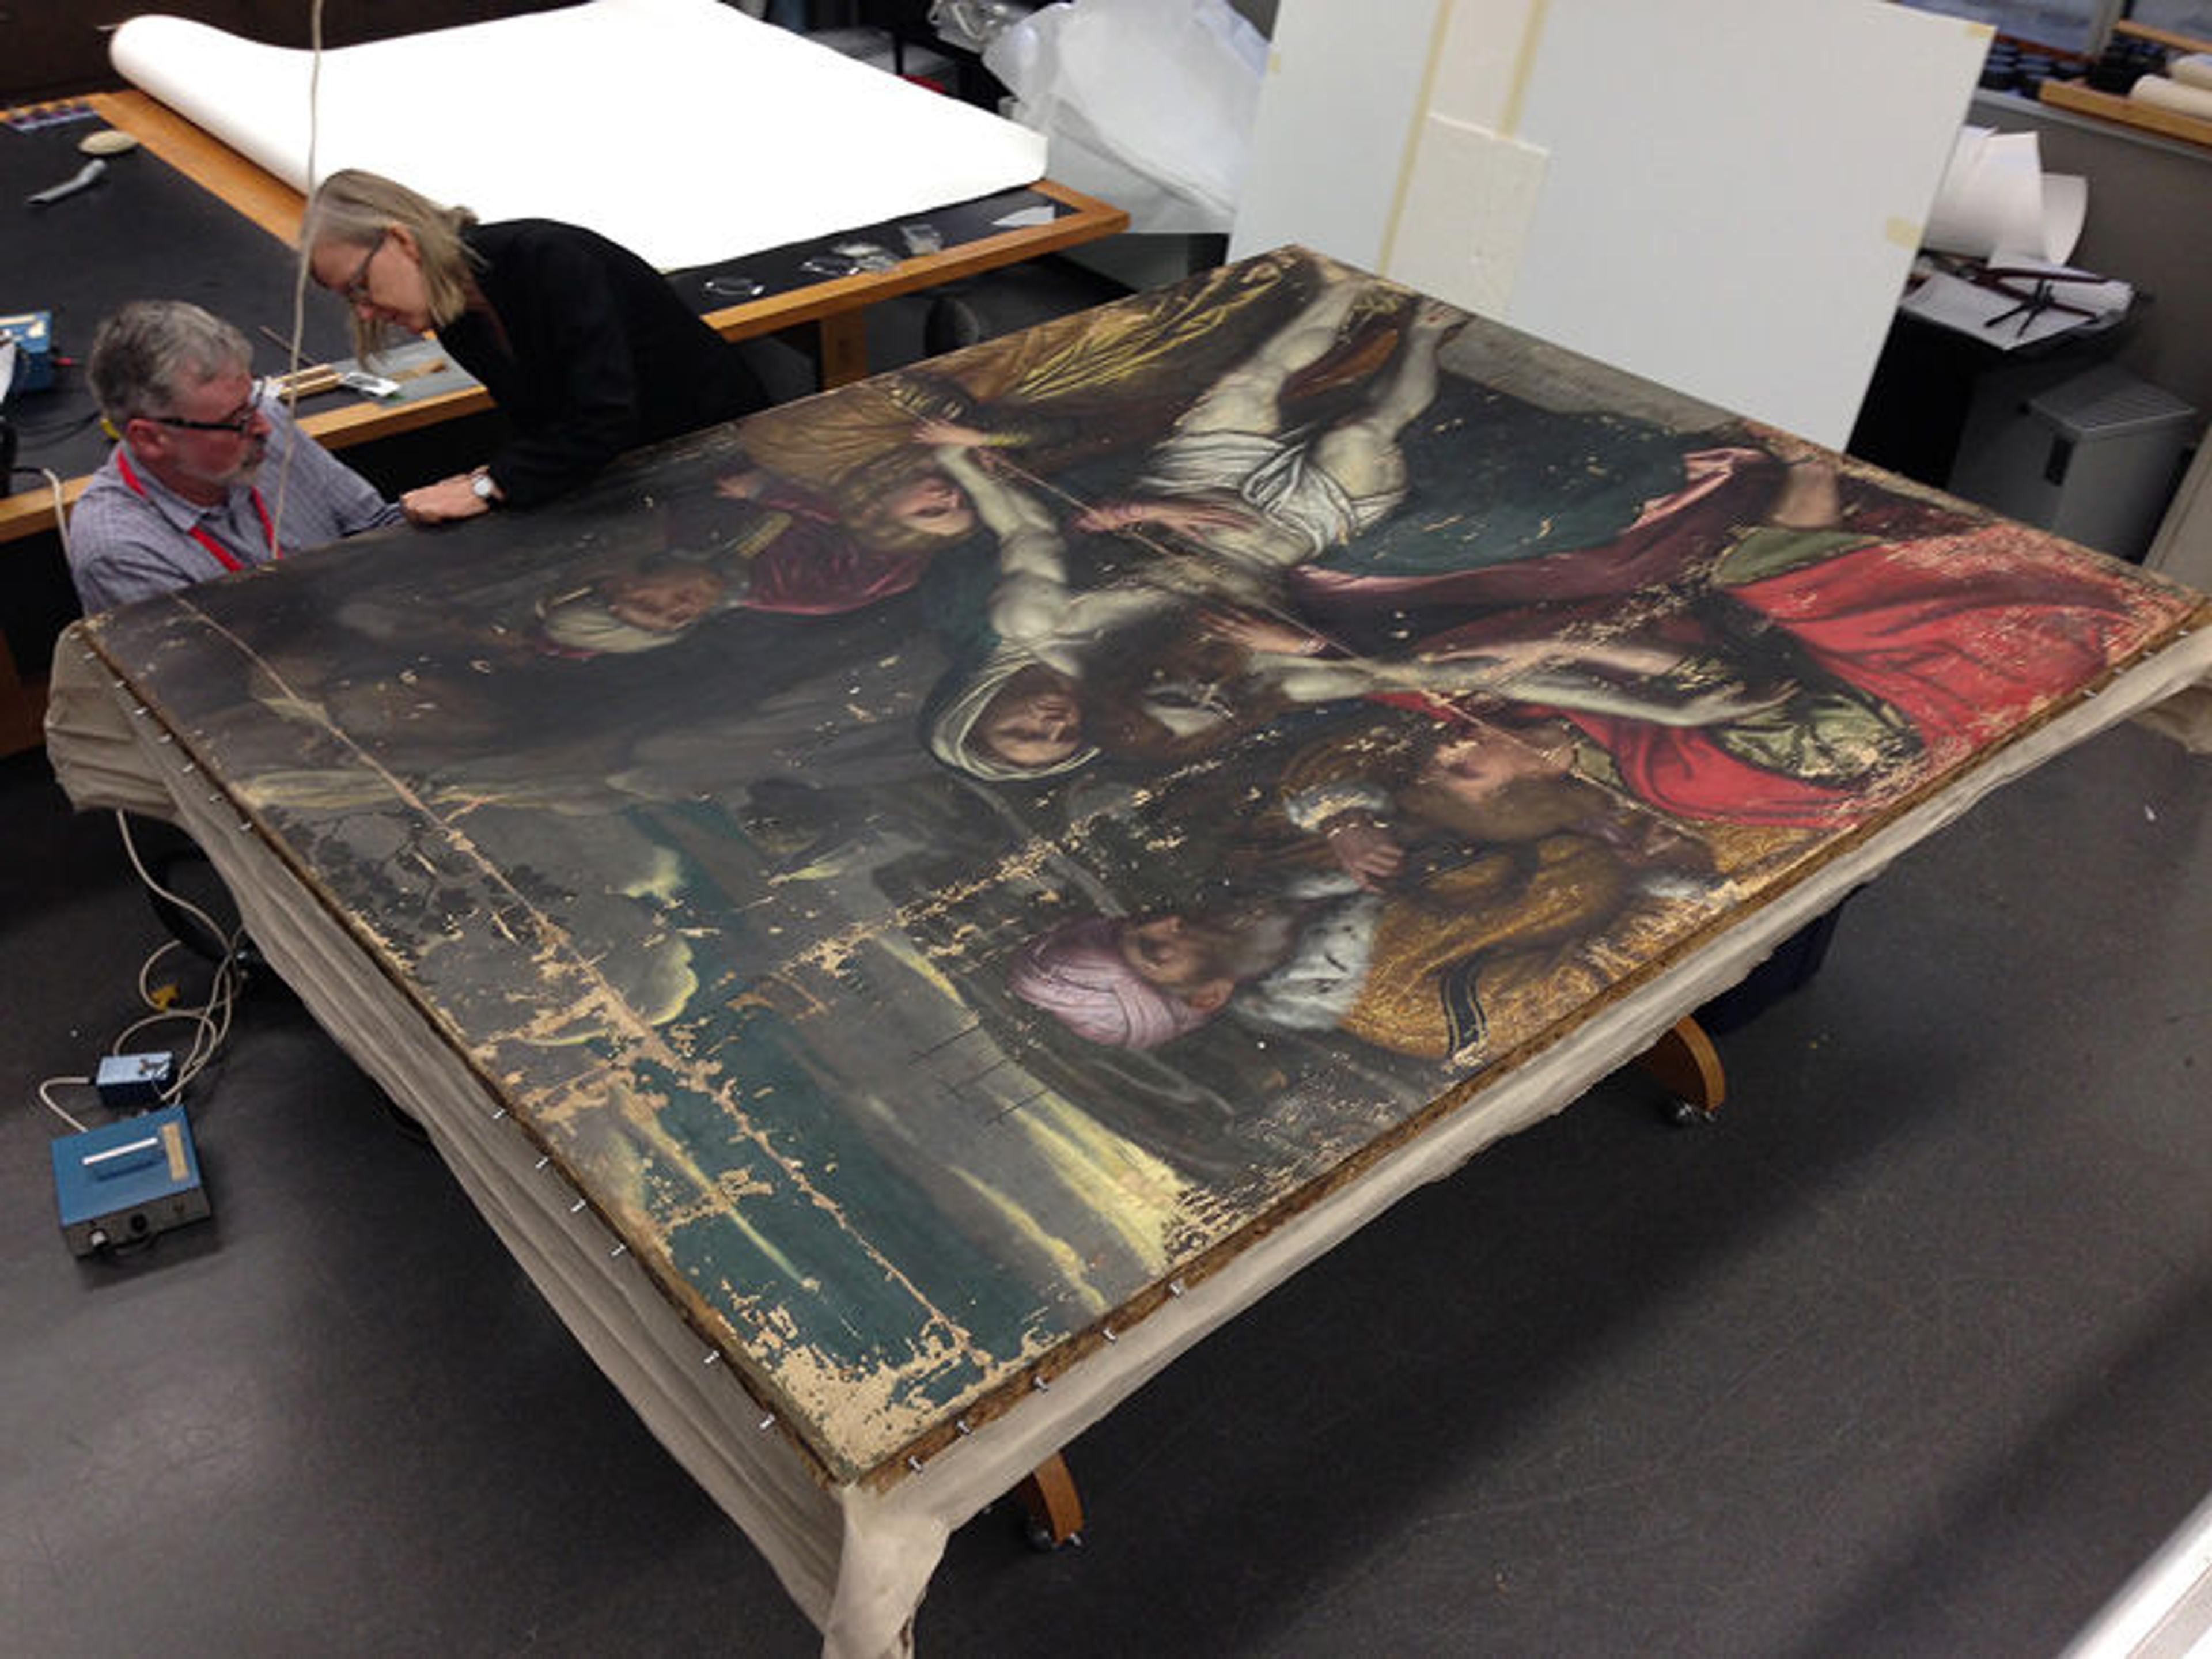 Two conservators put a sixteenth-century painting on a stretcher during conservation treatment